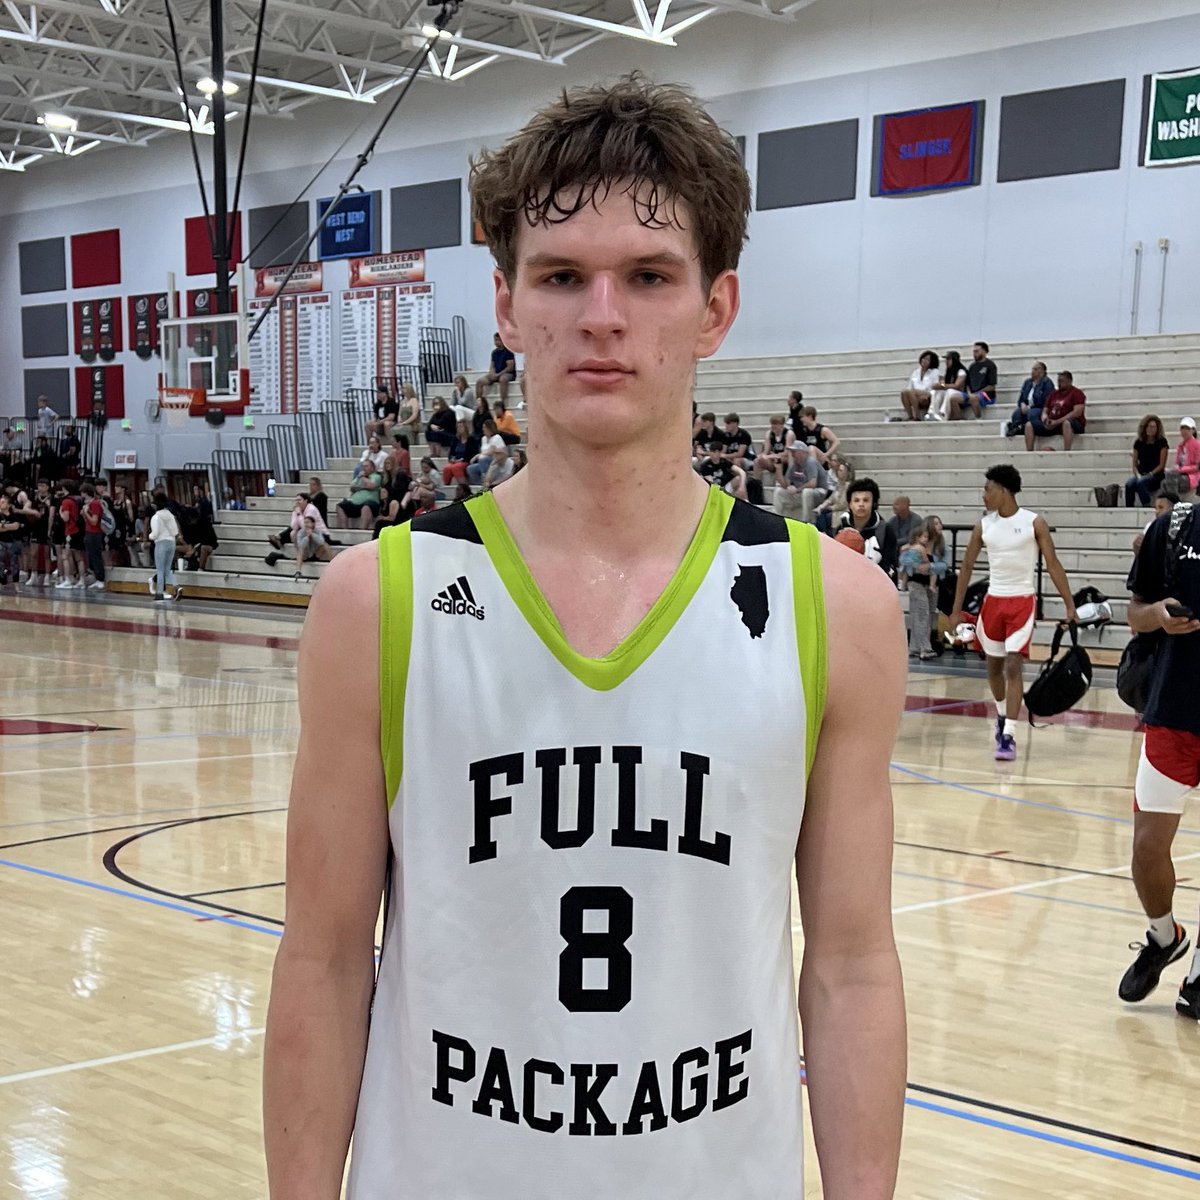 2025 6’3 Vincas Buzelis ended the weekend with a 26 point performance to lead @FPbasketball 17s to a win over The Academy. Crafty scorer gets to the rim and has a nice midrange game. @ny2lasports